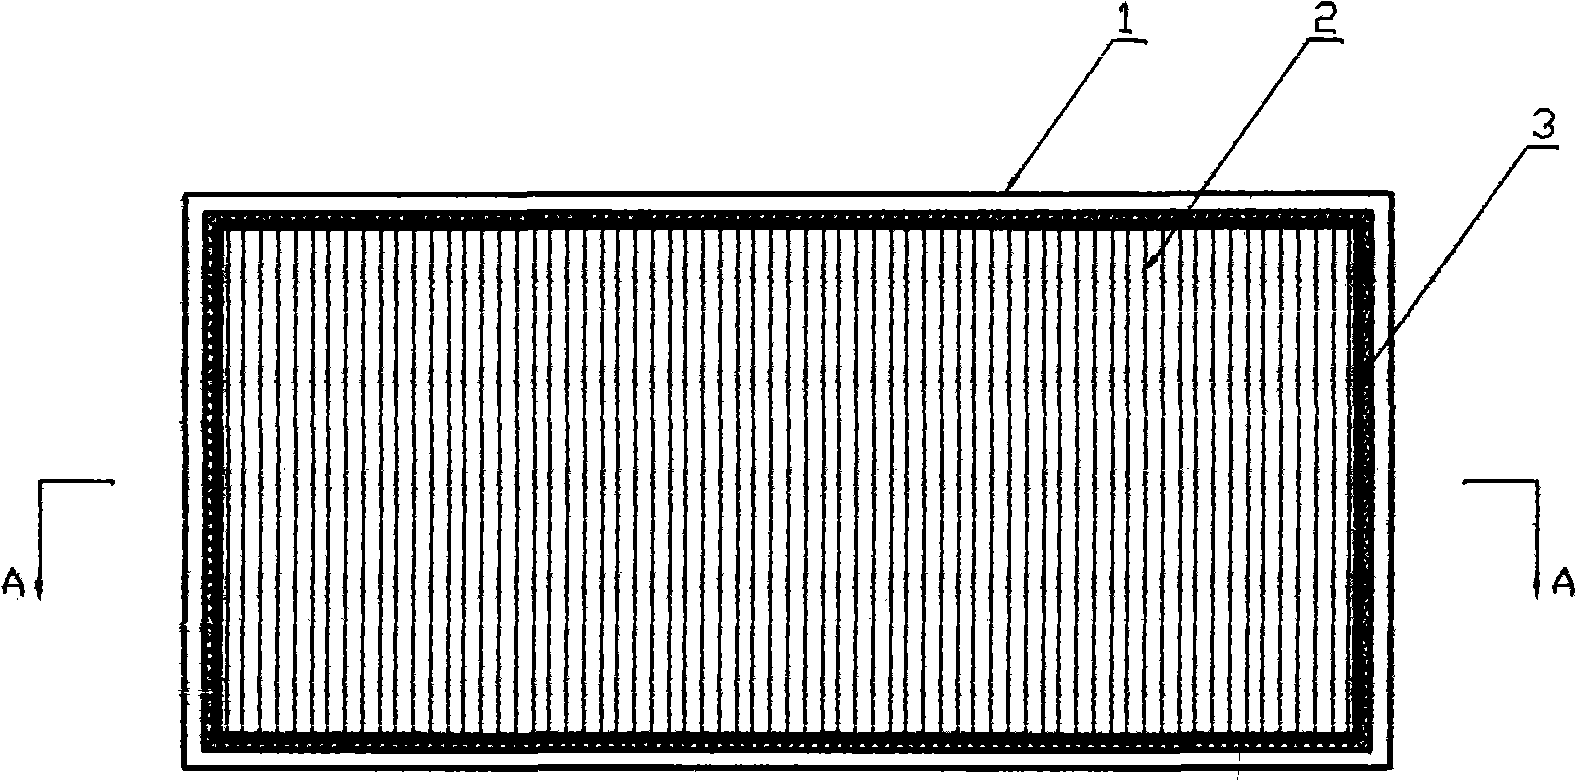 Multifunctional high-efficiency filter screen capable of cleaning and method for producing the same